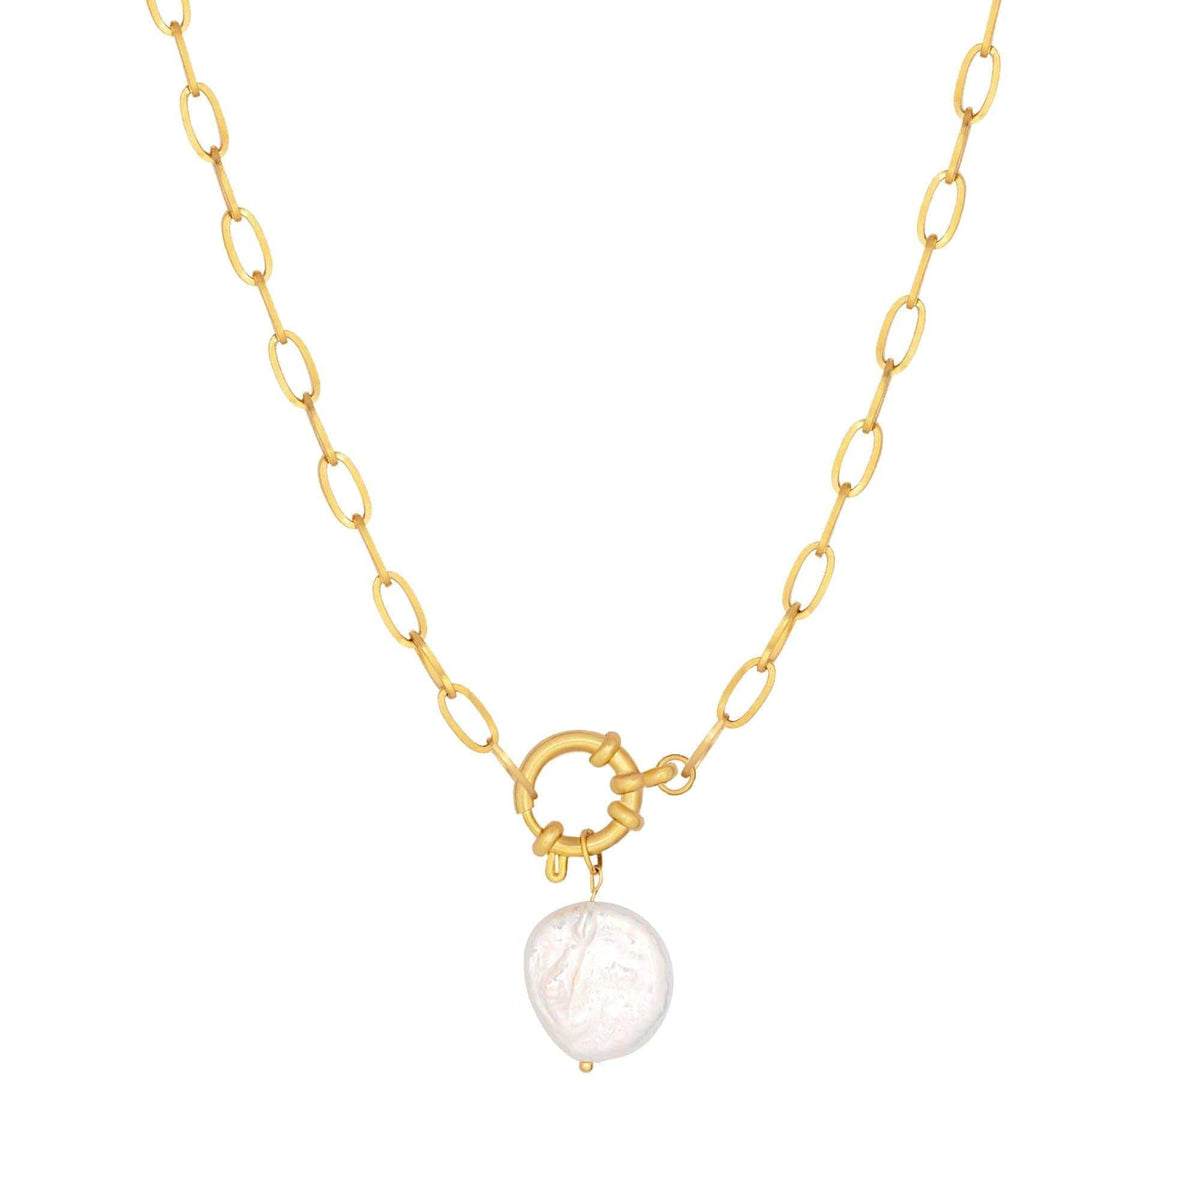 BohoMoon Stainless Steel Sicily Pearl Necklace Gold